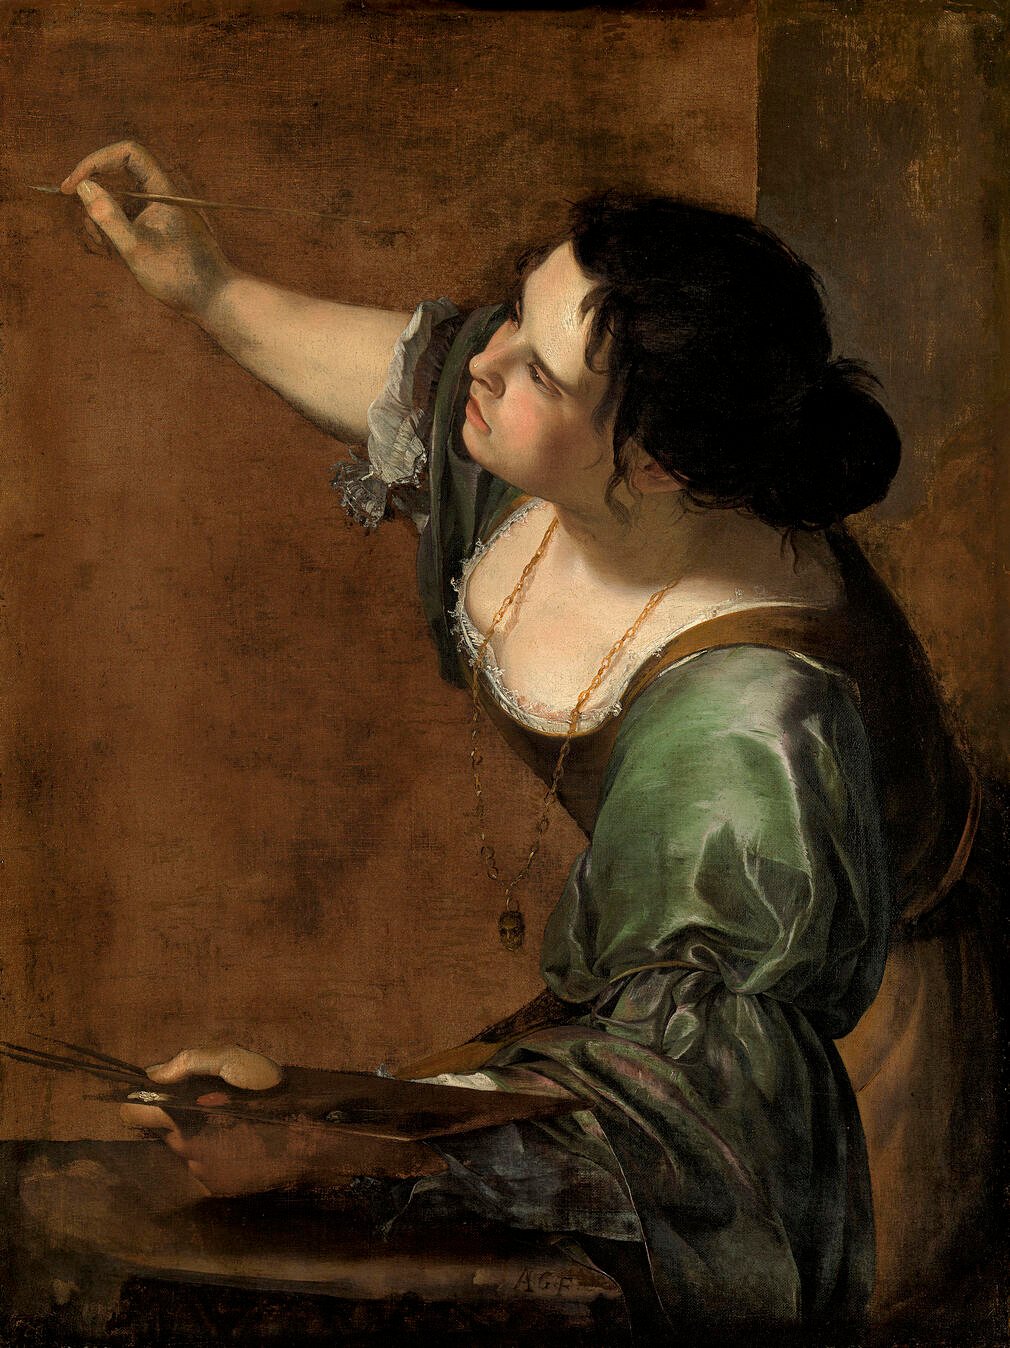 A painting of a woman painting a self portrait